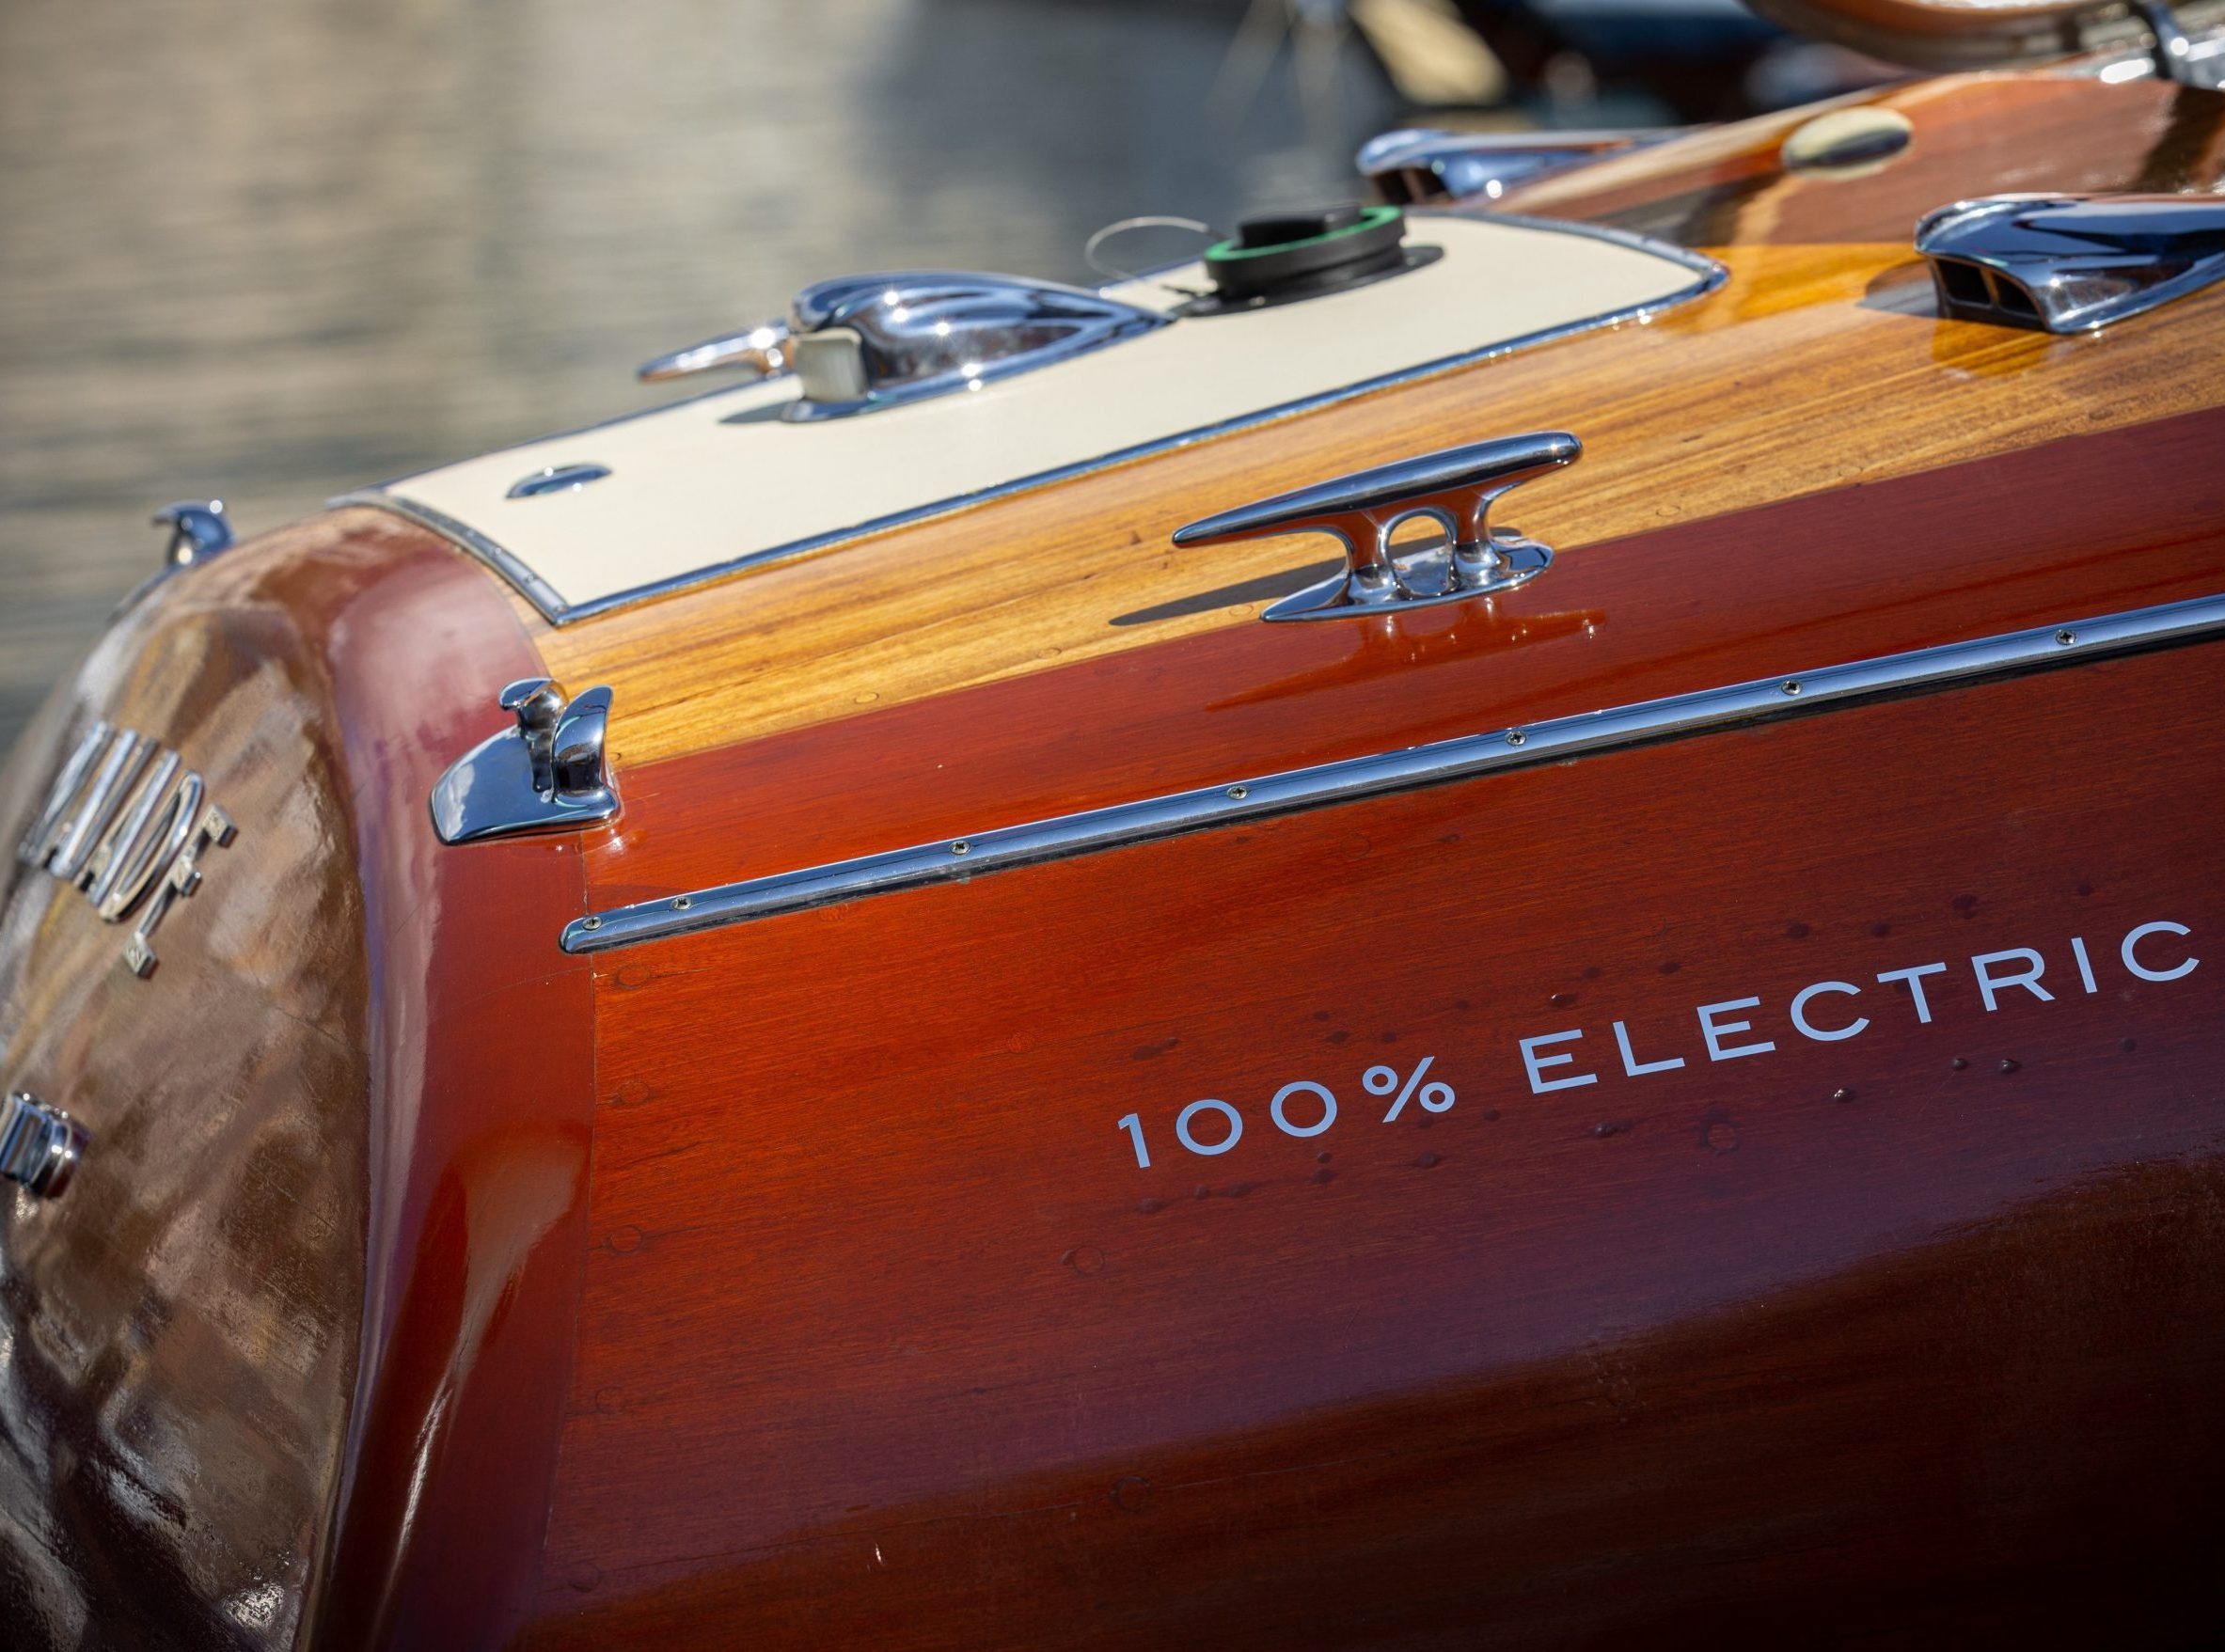 Bellini joins forces with Lanéva to electrify vintage luxury boats